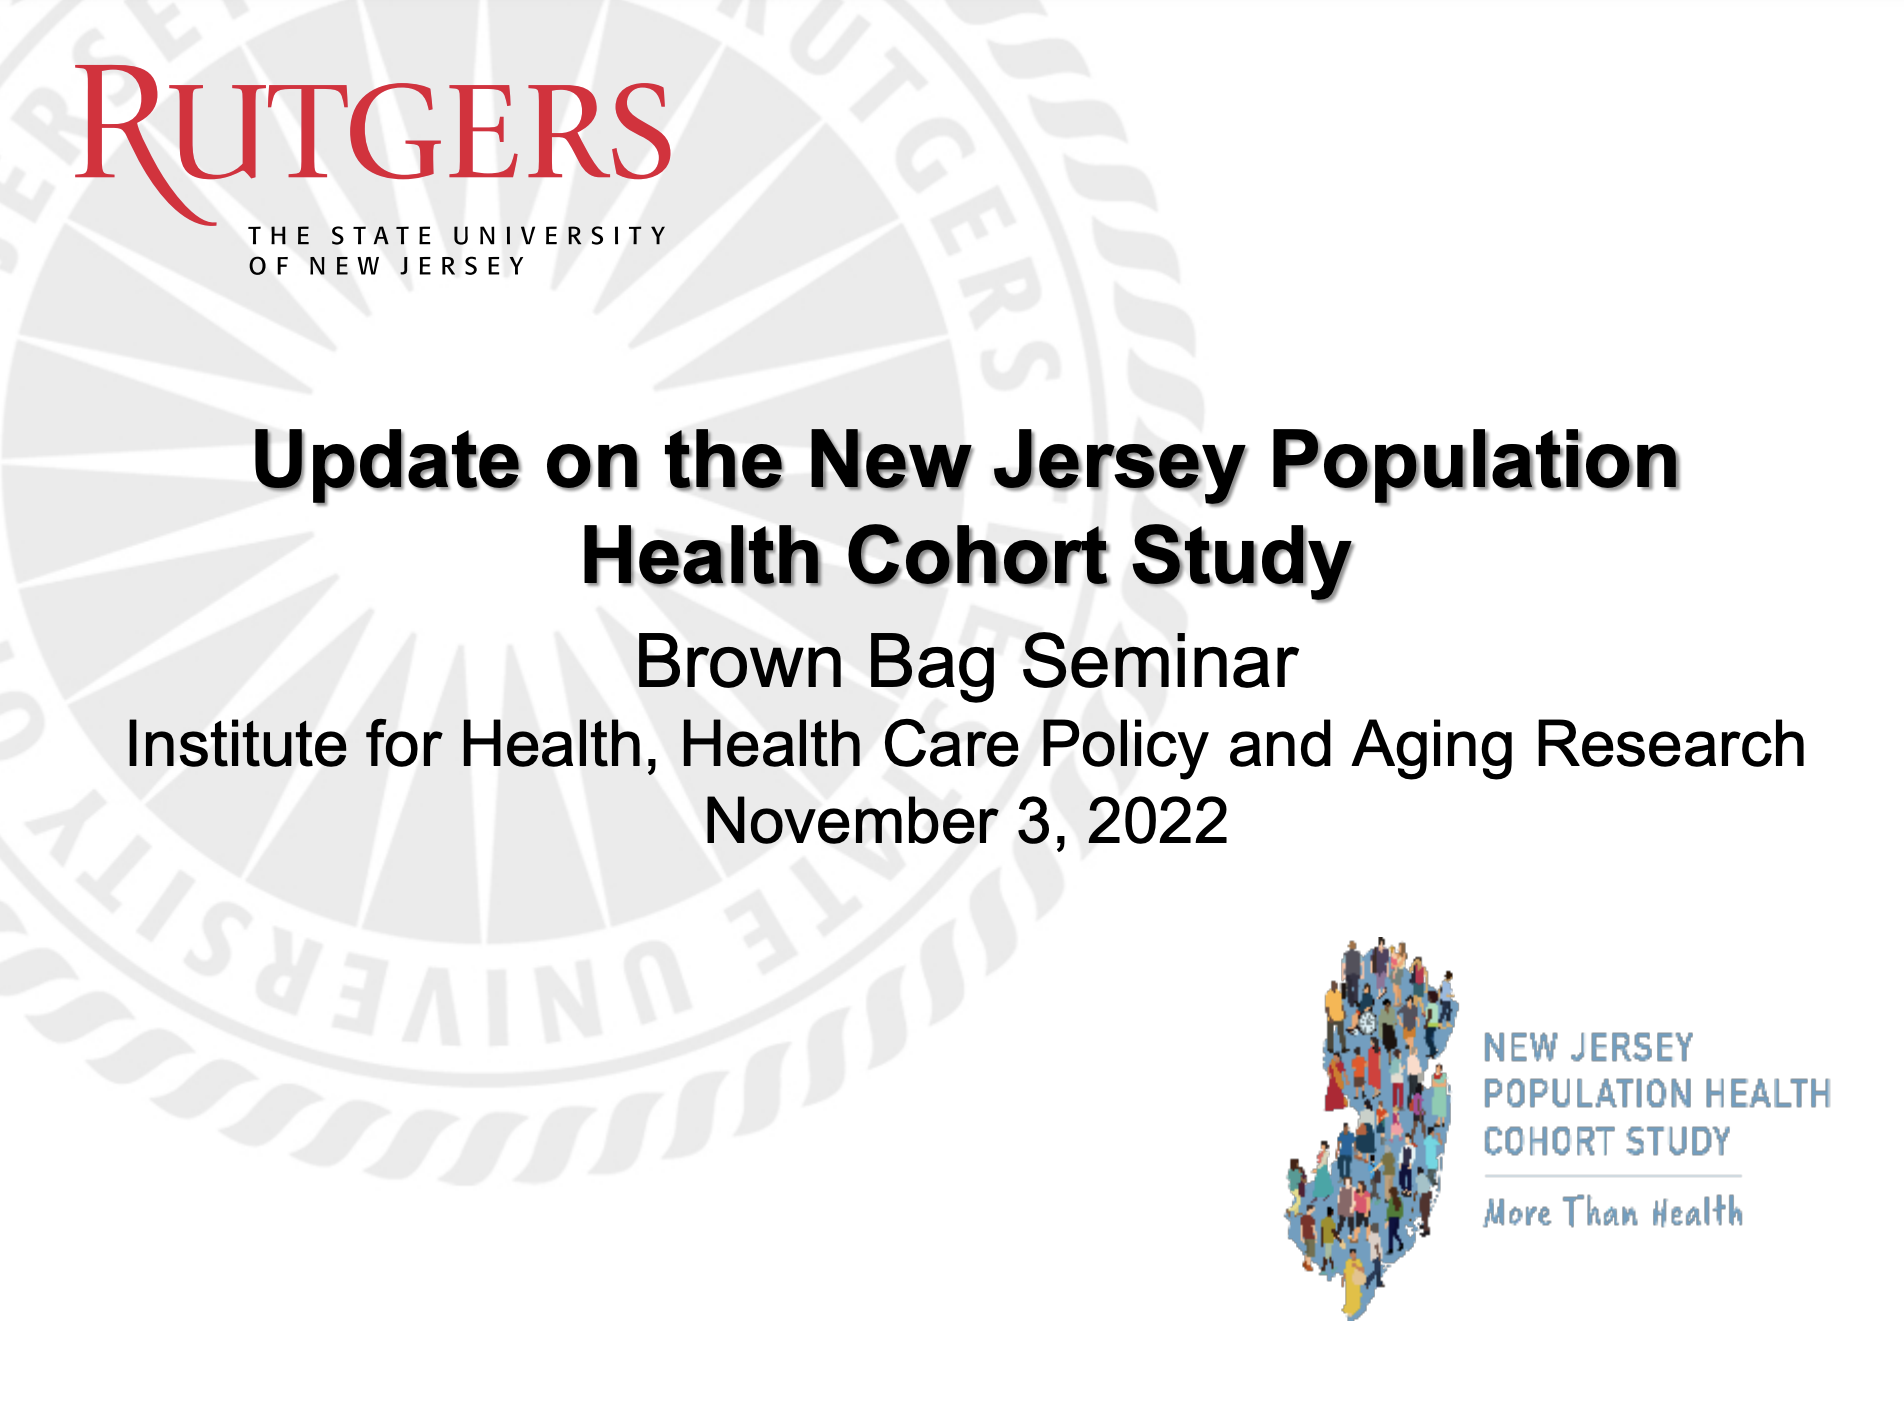 Update on the New Jersey Population Health Cohort Study